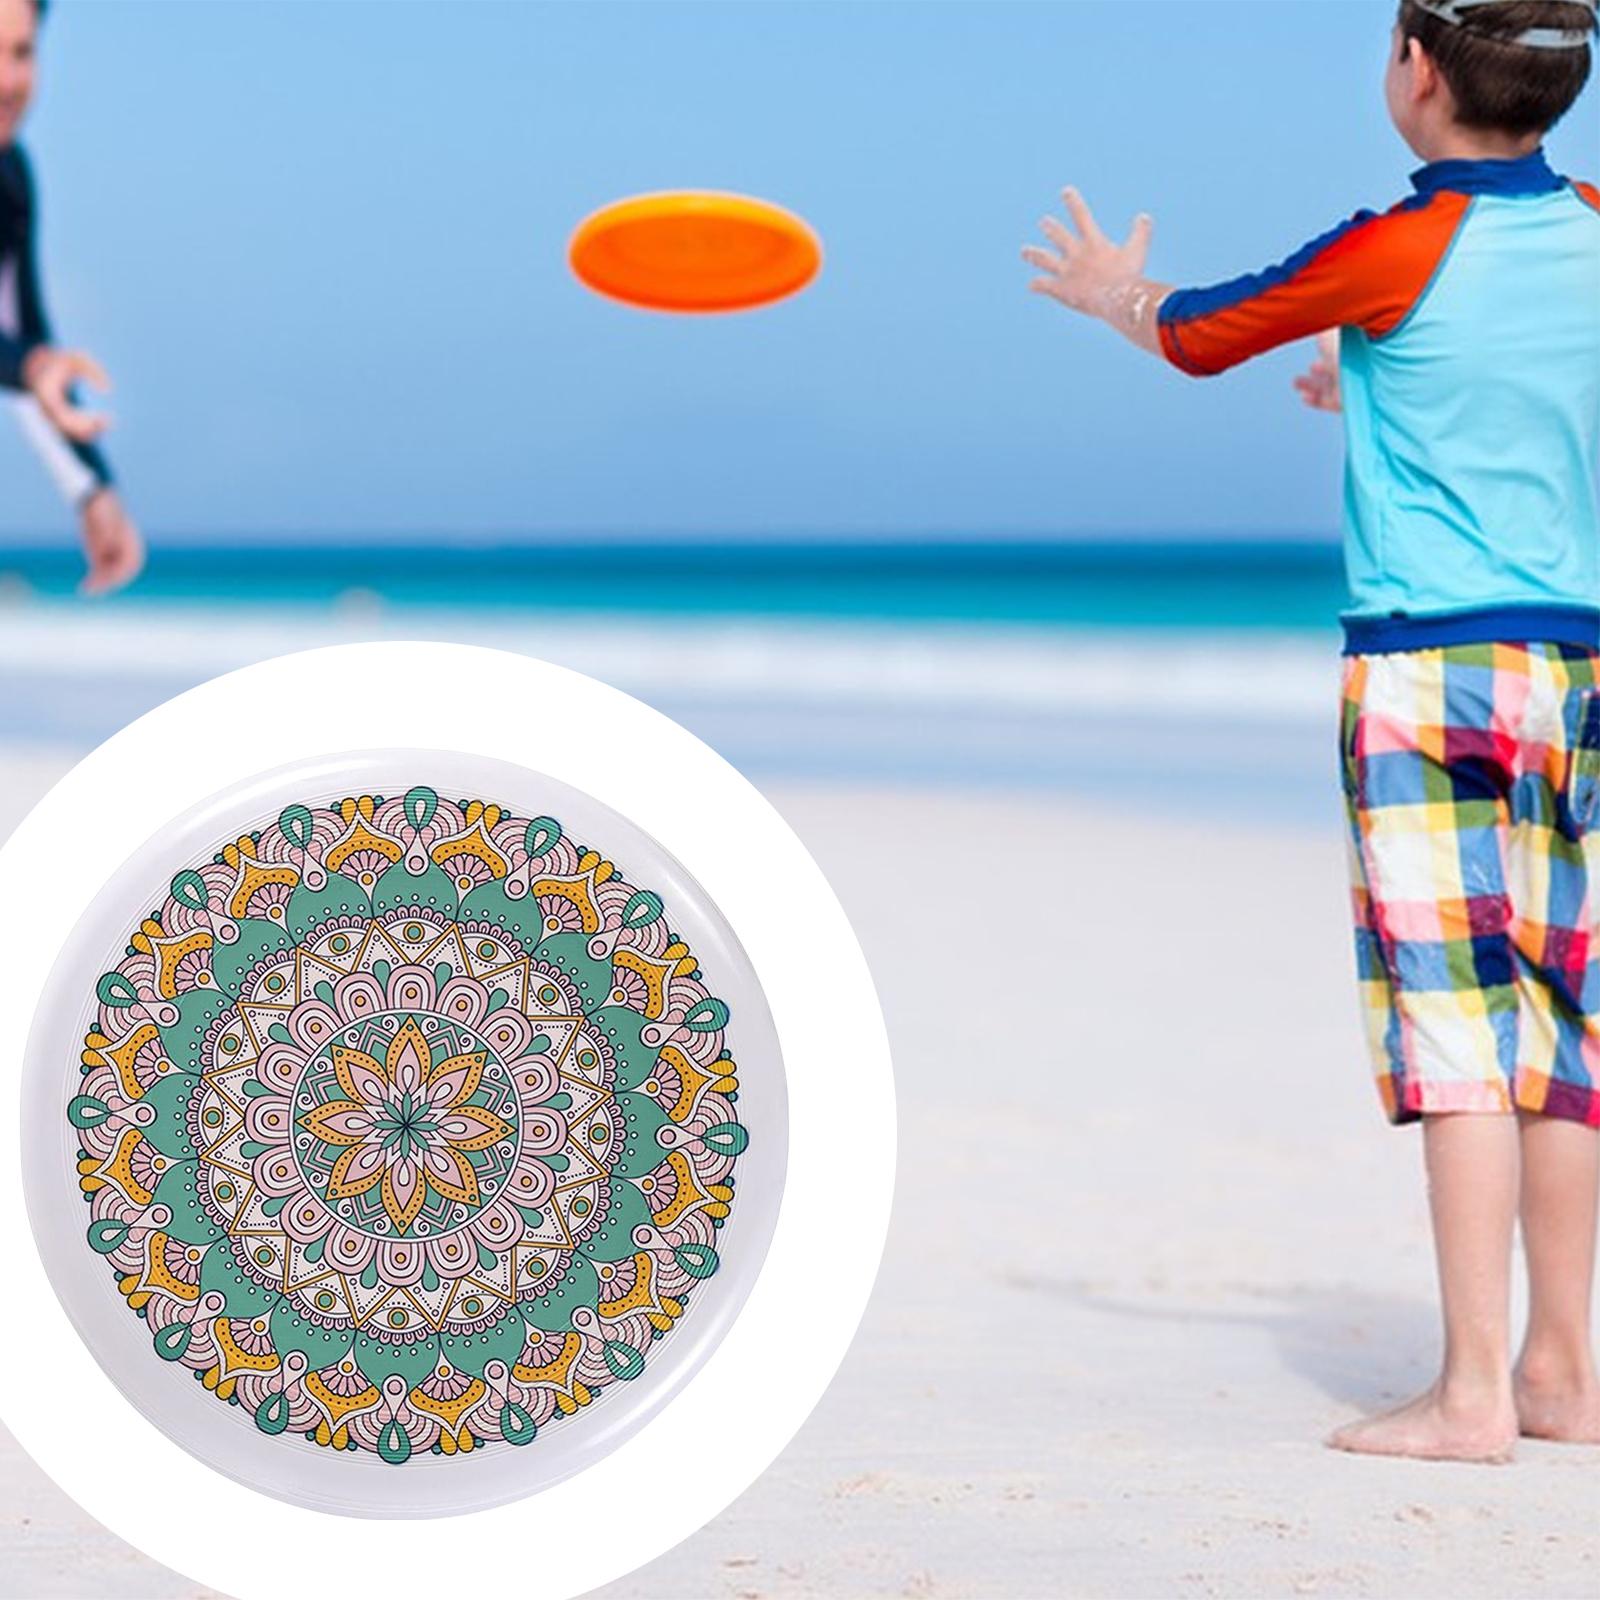 Flying Saucers Outdoor Throwing Adults Flying Round Discs Toys Multicolor